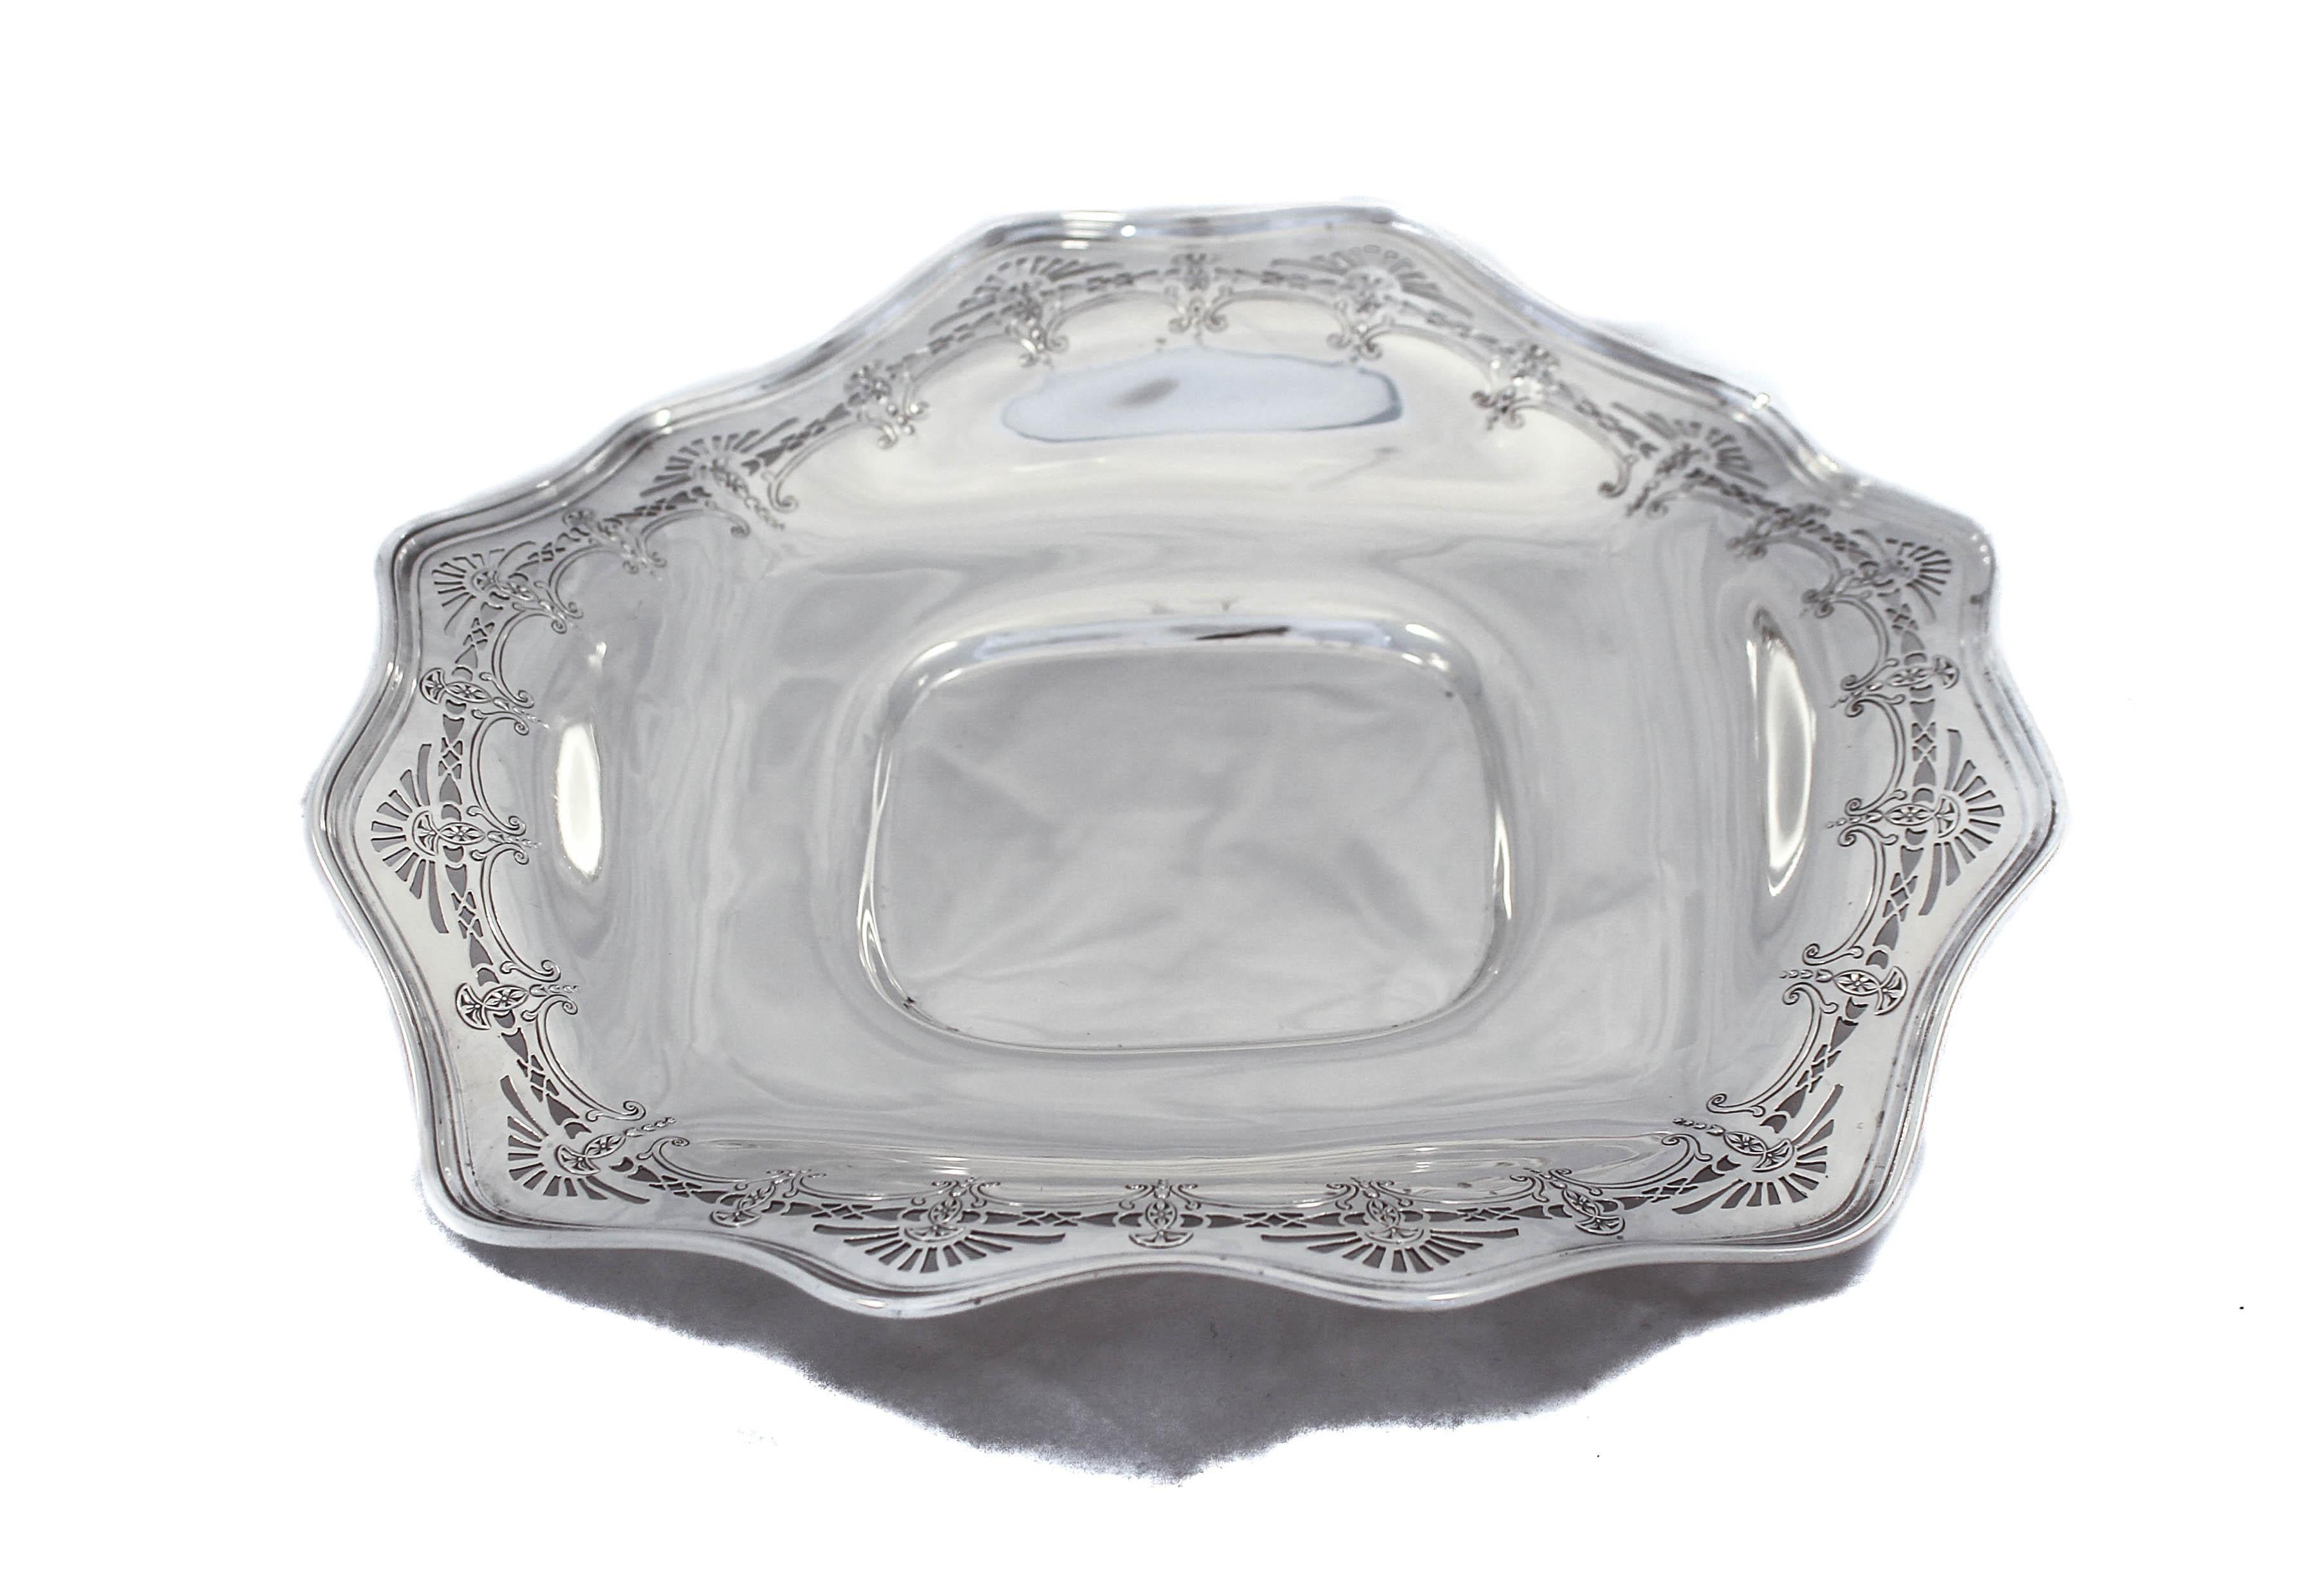 We are thrilled to offer this sterling silver dessert tray by the Frank Whiting Silver Company. 
It has a fluted rim and pretty cutout work along the edge. It has a double border, what a nice surprise! It’s shaped like a square but without the